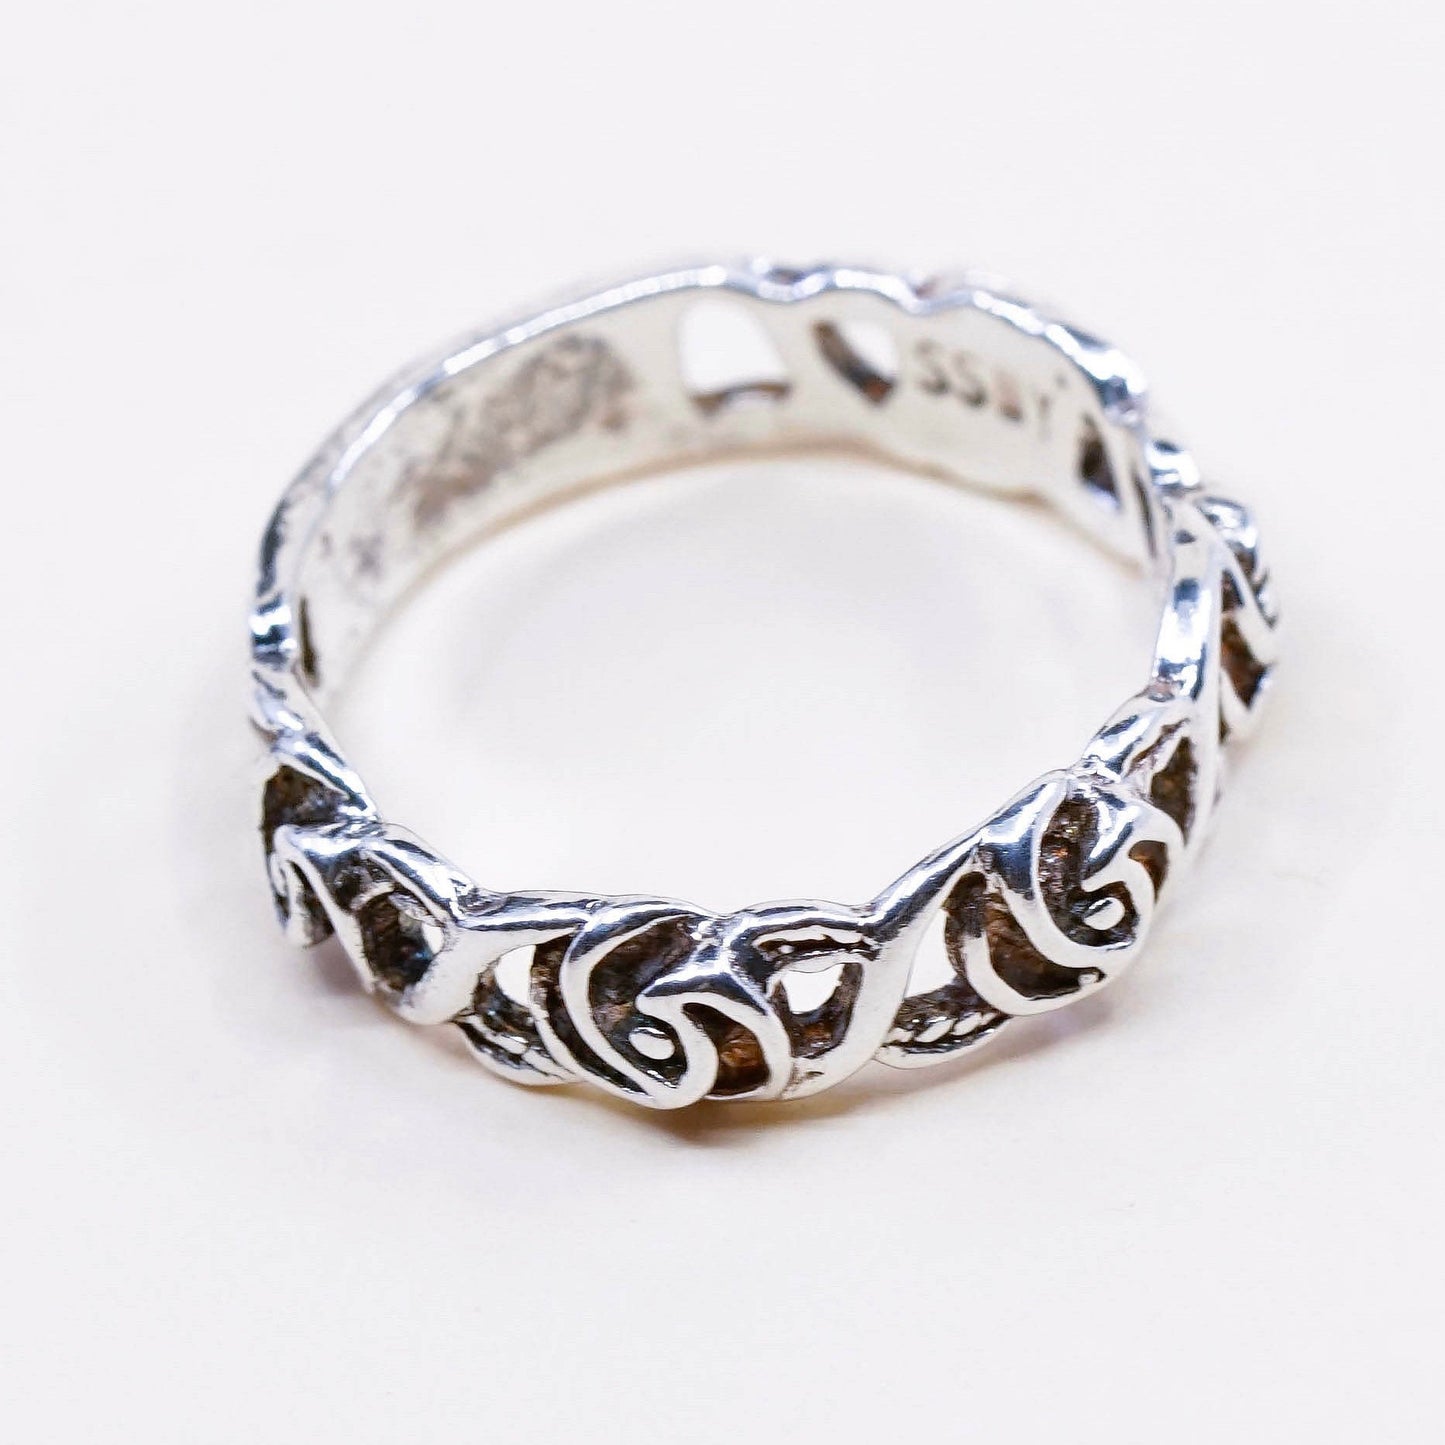 Size 7.25, vintage sterling silver handmade ring, 925 band with floral flower